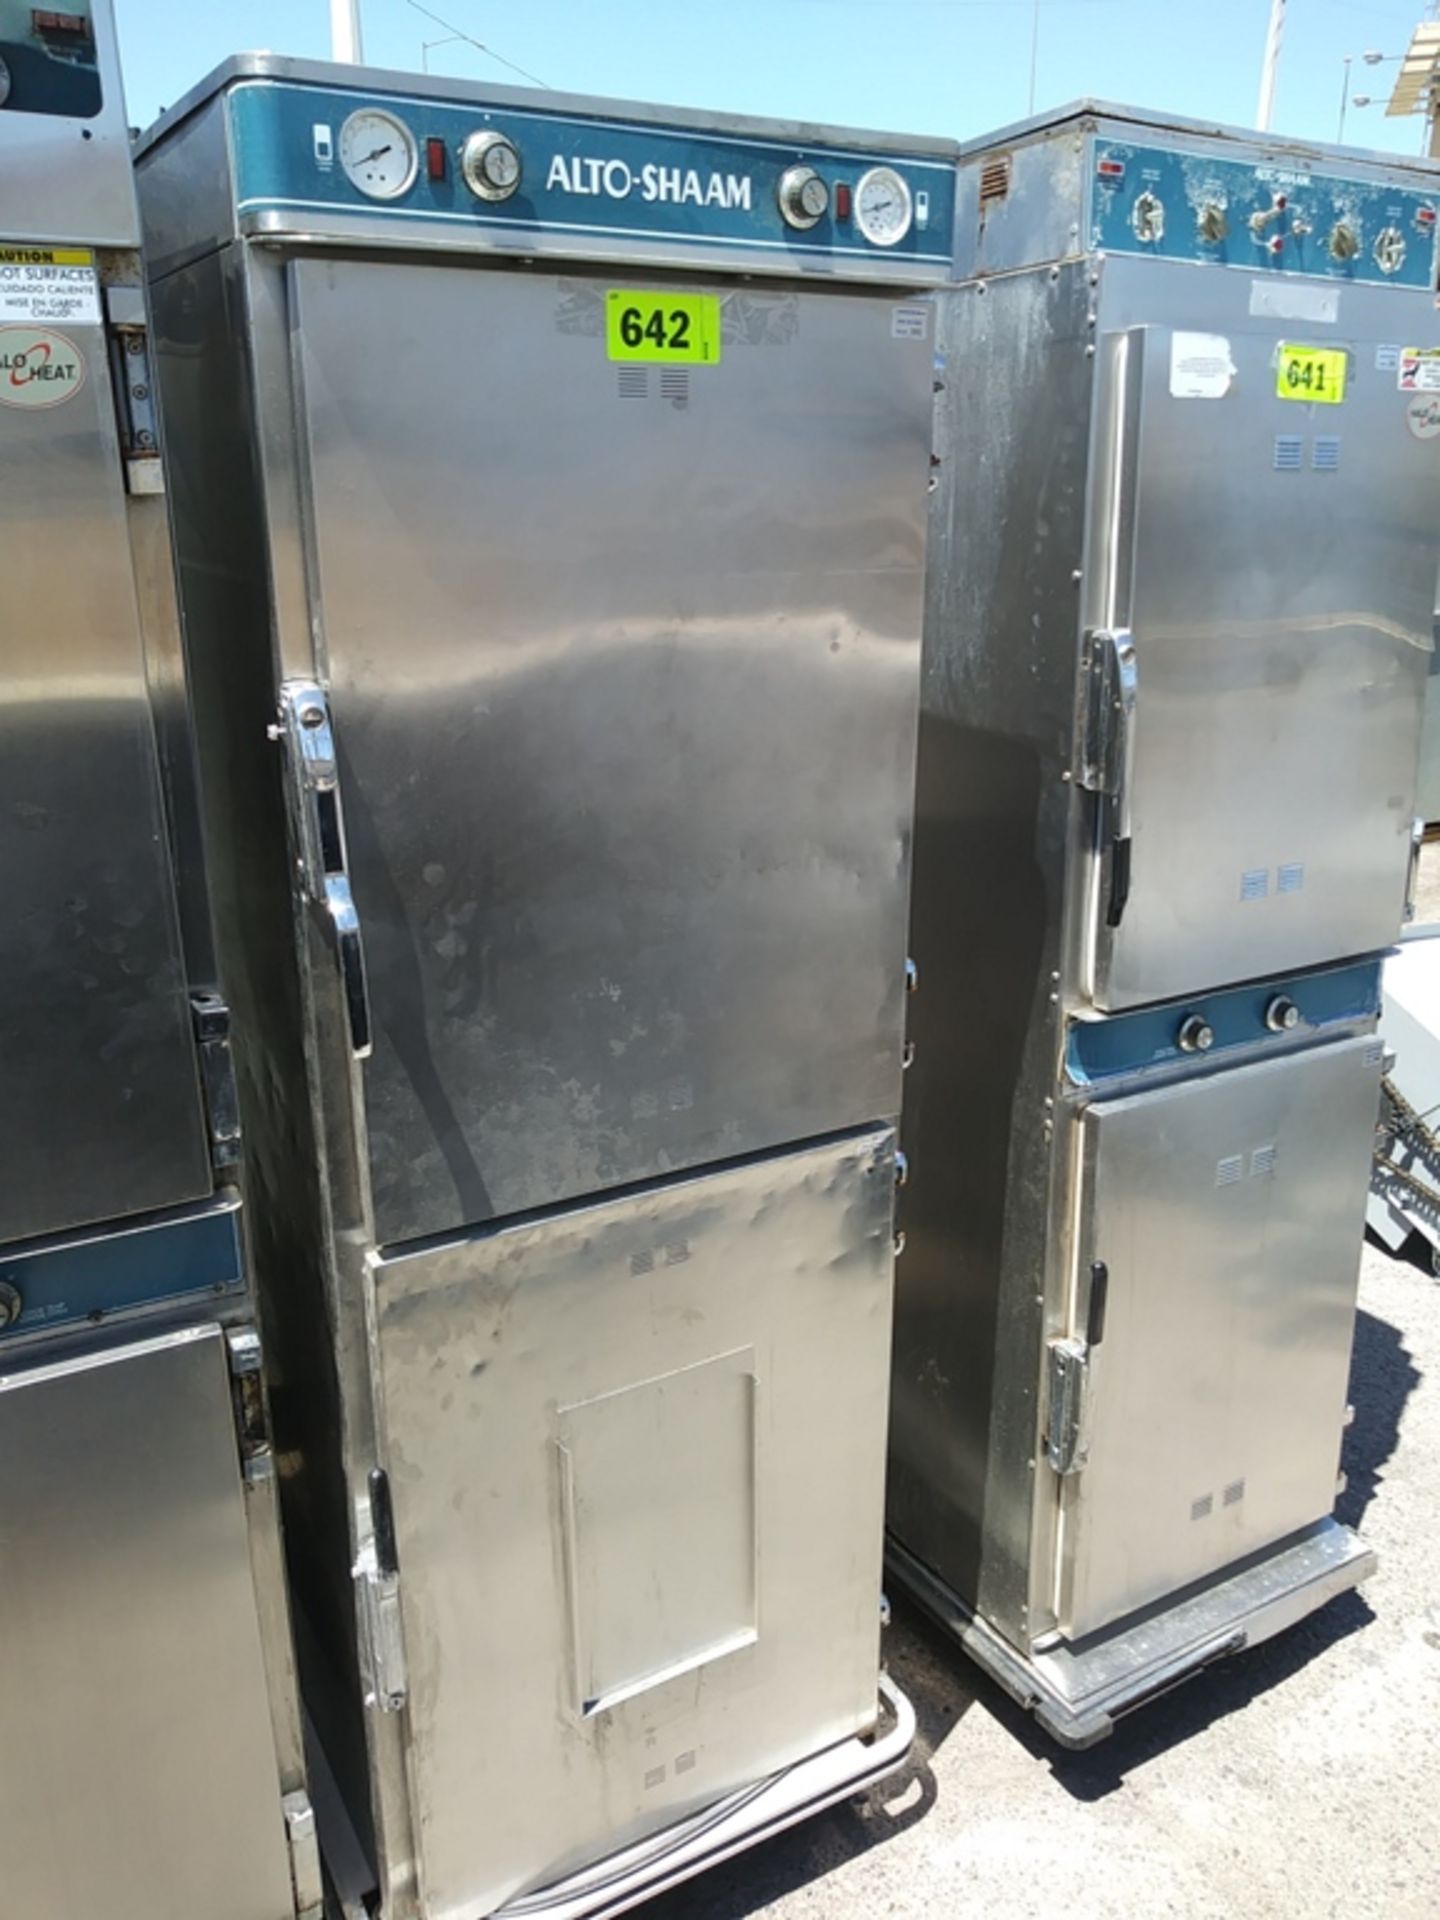 ALTO-SHAAM HALO HEAT FOOD WARMING CABINET (1200-UP) - Image 2 of 4